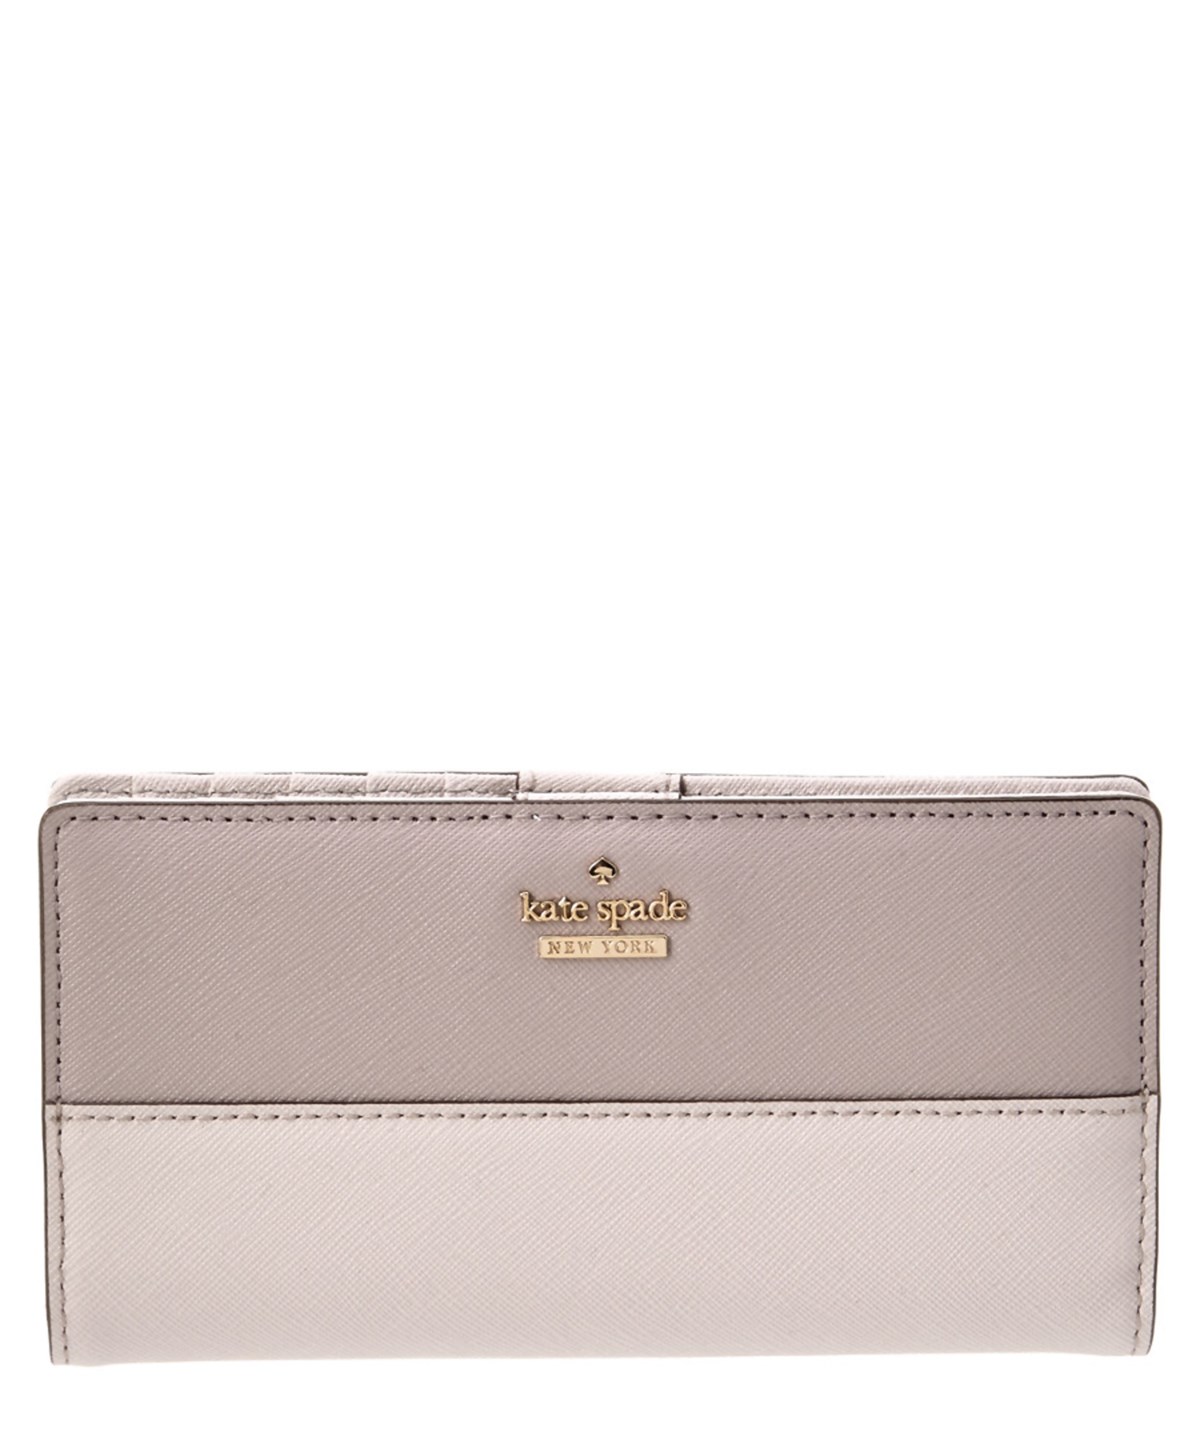 Kate Spade New York Cameron Street Large Stacy Leather Wallet' In Beige ...